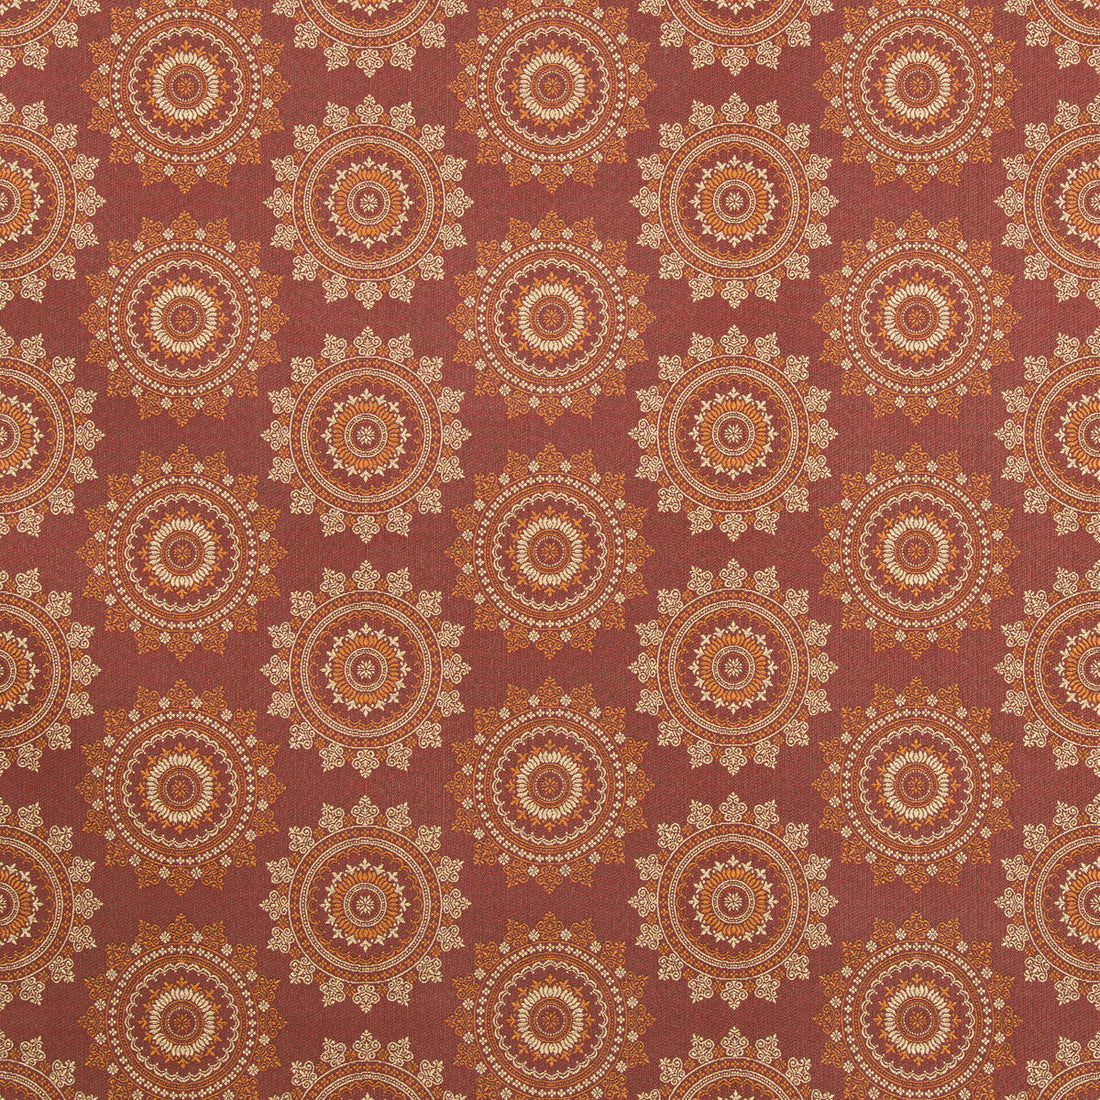 Piatto fabric in cinnabar color - pattern 35865.924.0 - by Kravet Contract in the Gis Crypton Green collection